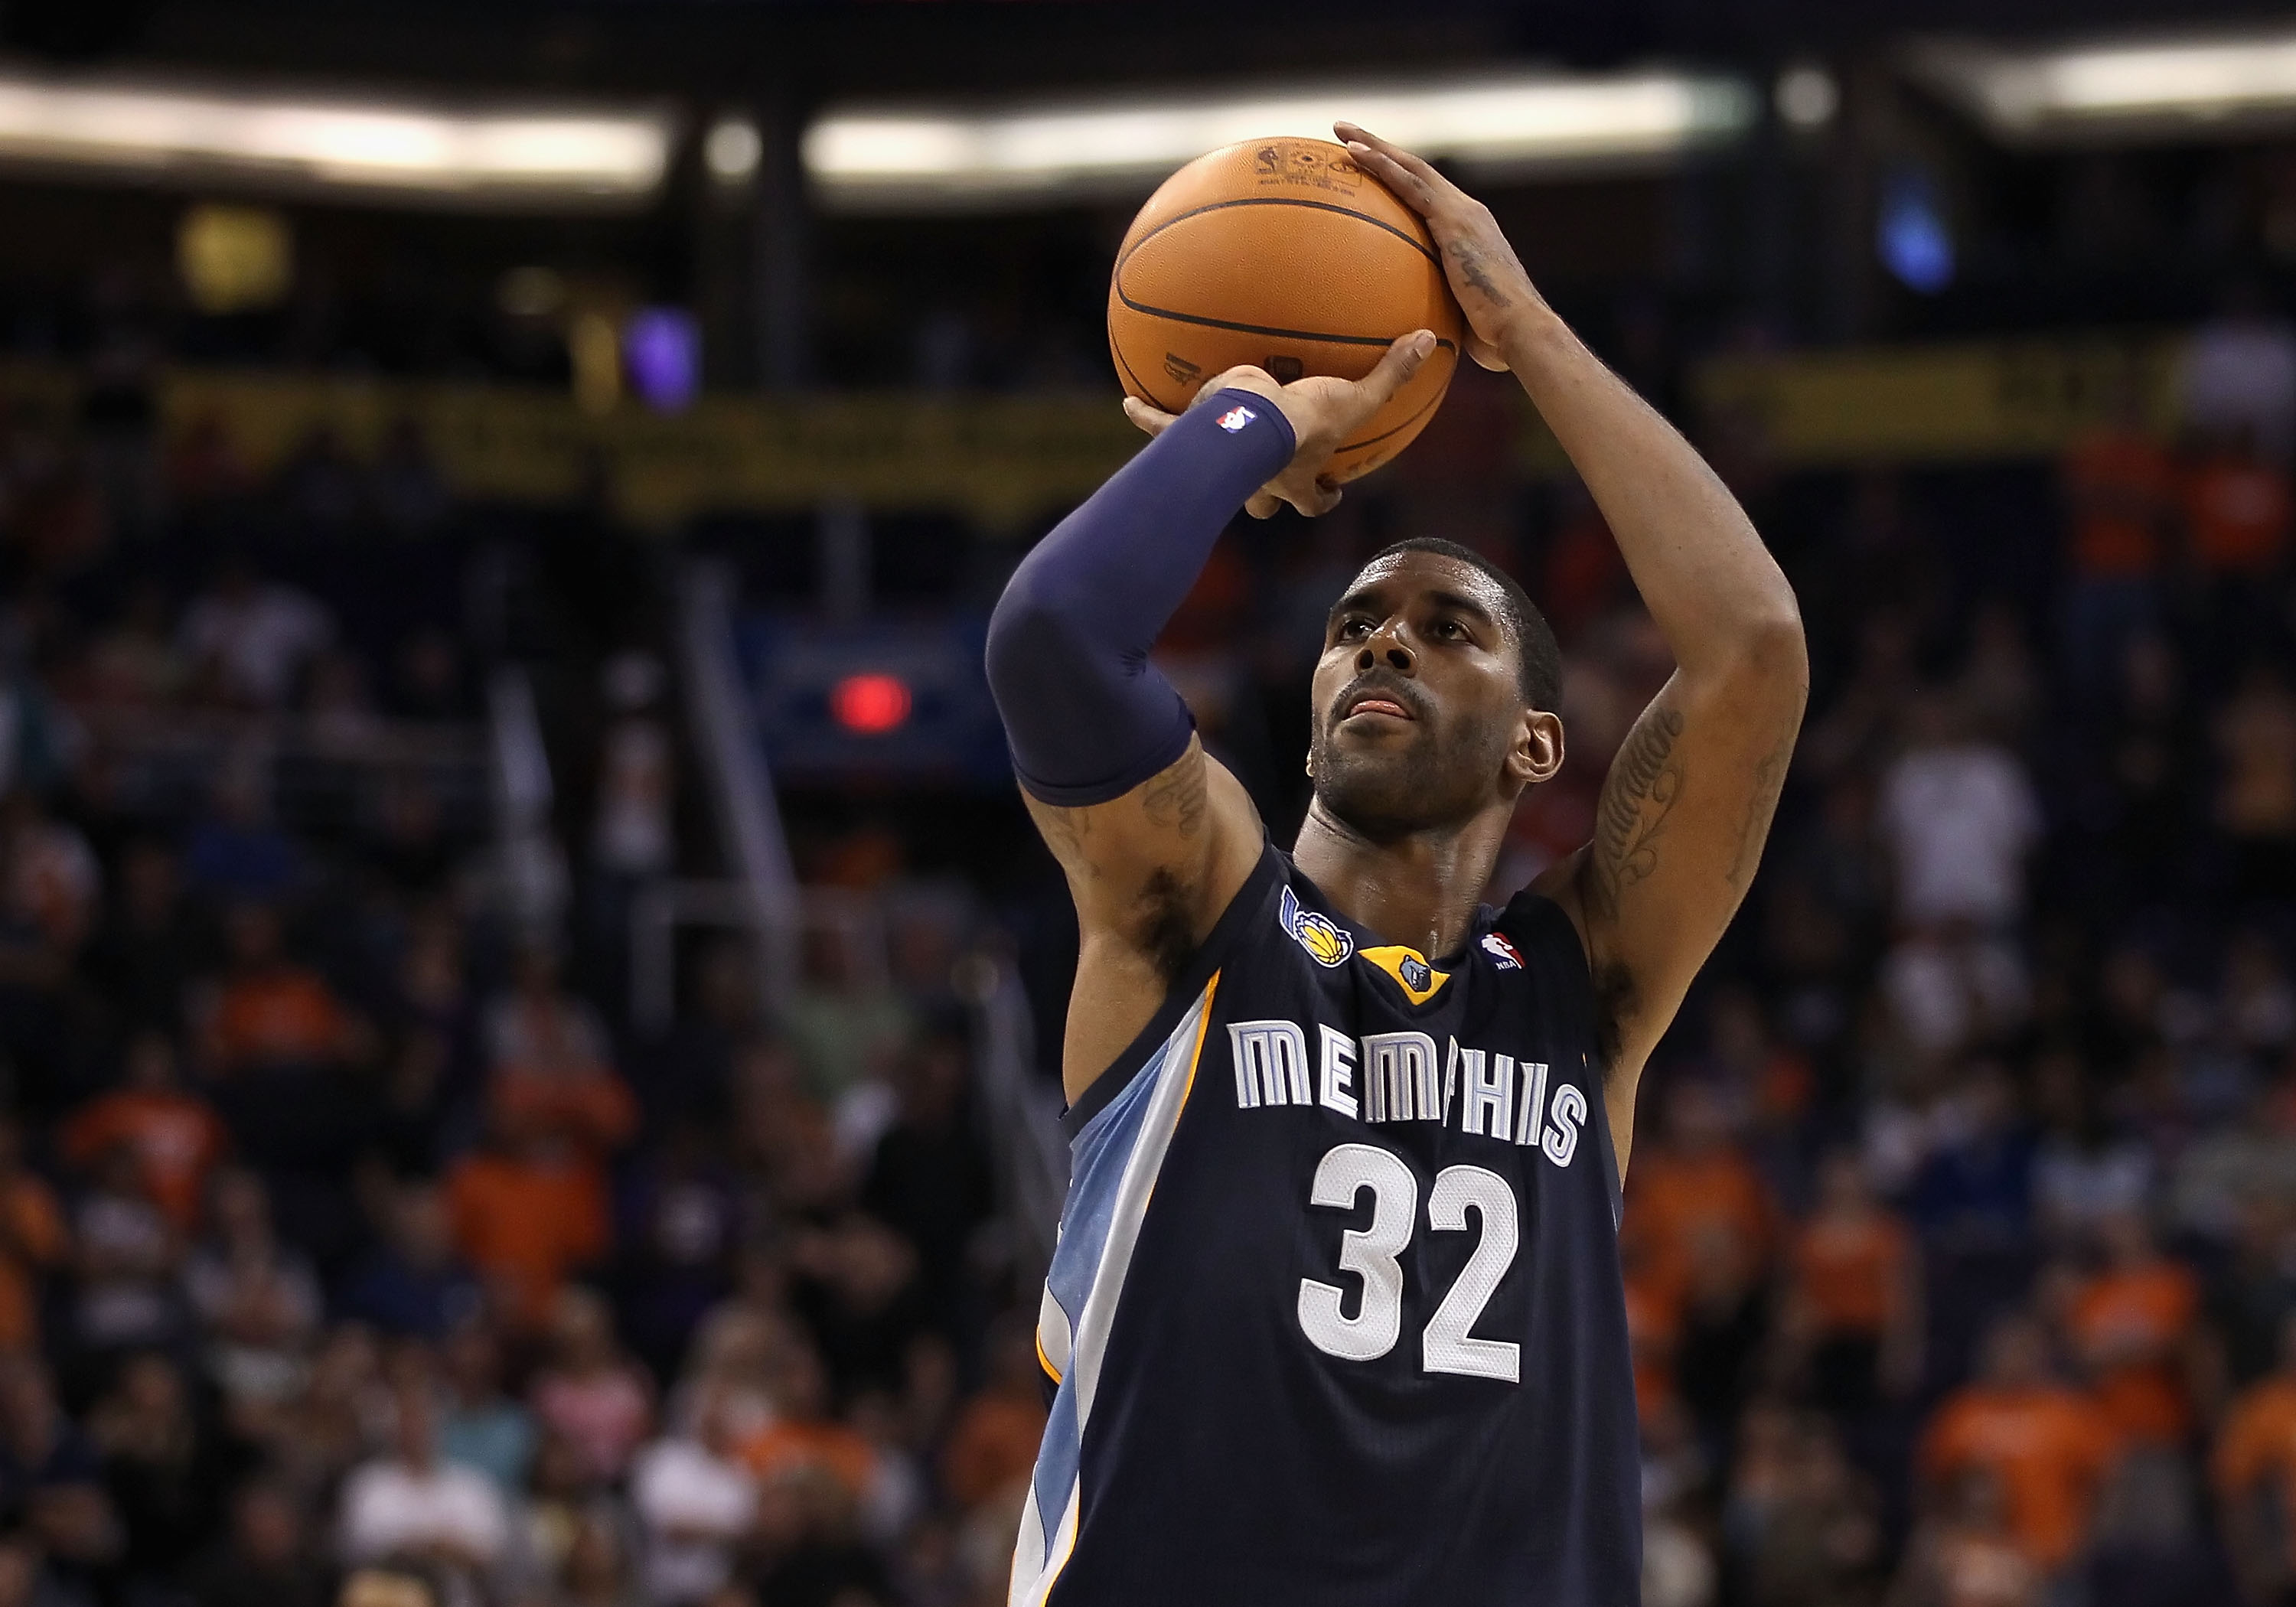 PHOENIX - NOVEMBER 05:  O.J. Mayo #32 of the Memphis Grizzlies shoots a free throw shot during the NBA game against the Phoenix Suns at US Airways Center on November 5, 2010 in Phoenix, Arizona. NOTE TO USER: User expressly acknowledges and agrees that, b